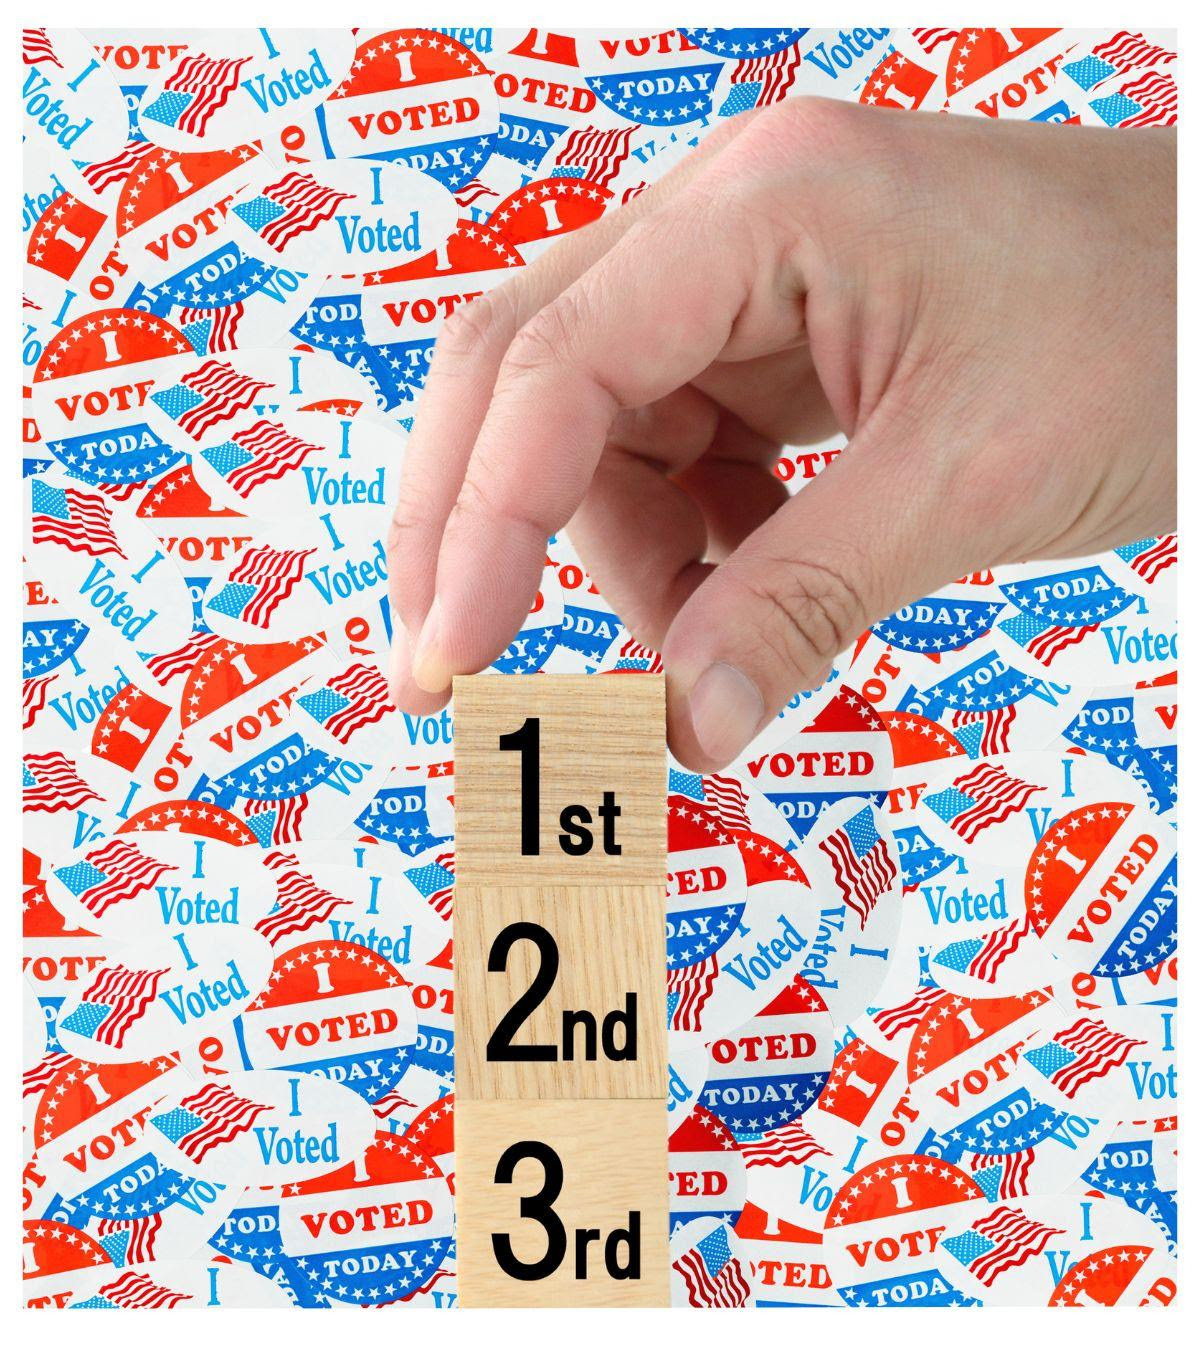 ranked choice voting image with "1st", "2nd", "3rd" on scrabble tiles layed over image of layered graphic of "I Voted" stickers